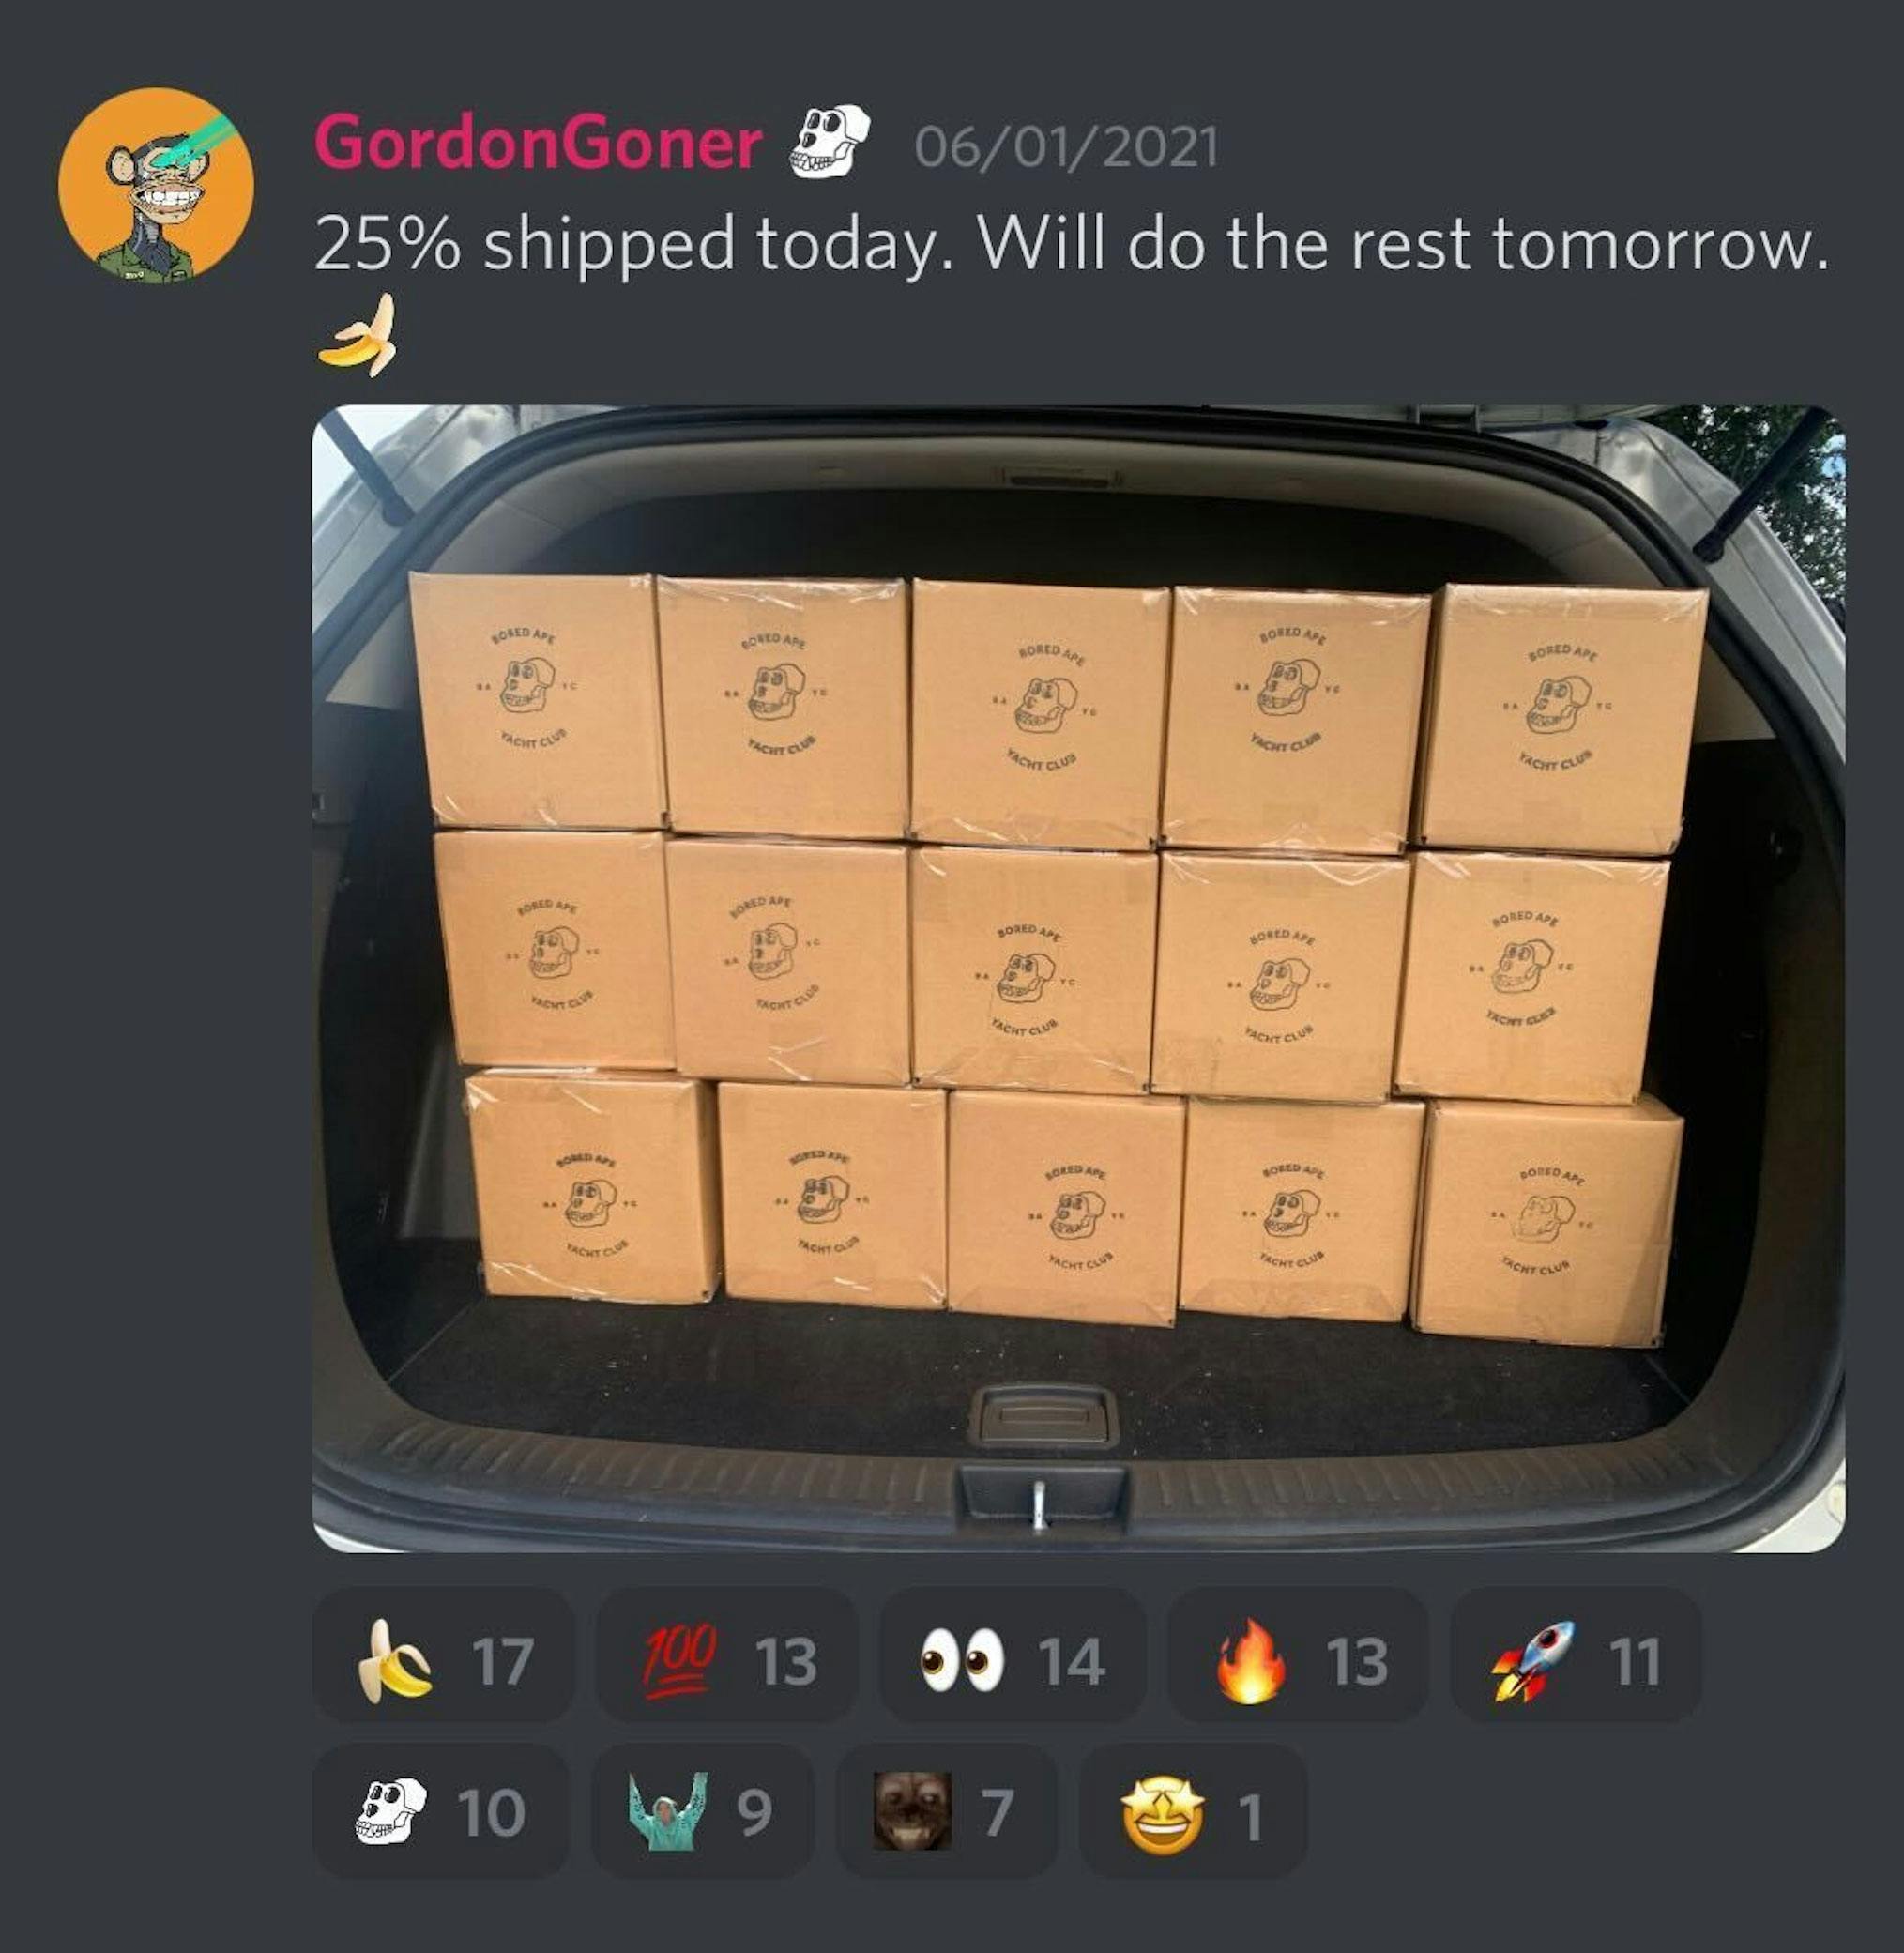 Screenshot of twitter showing merch boxes in trunk of car